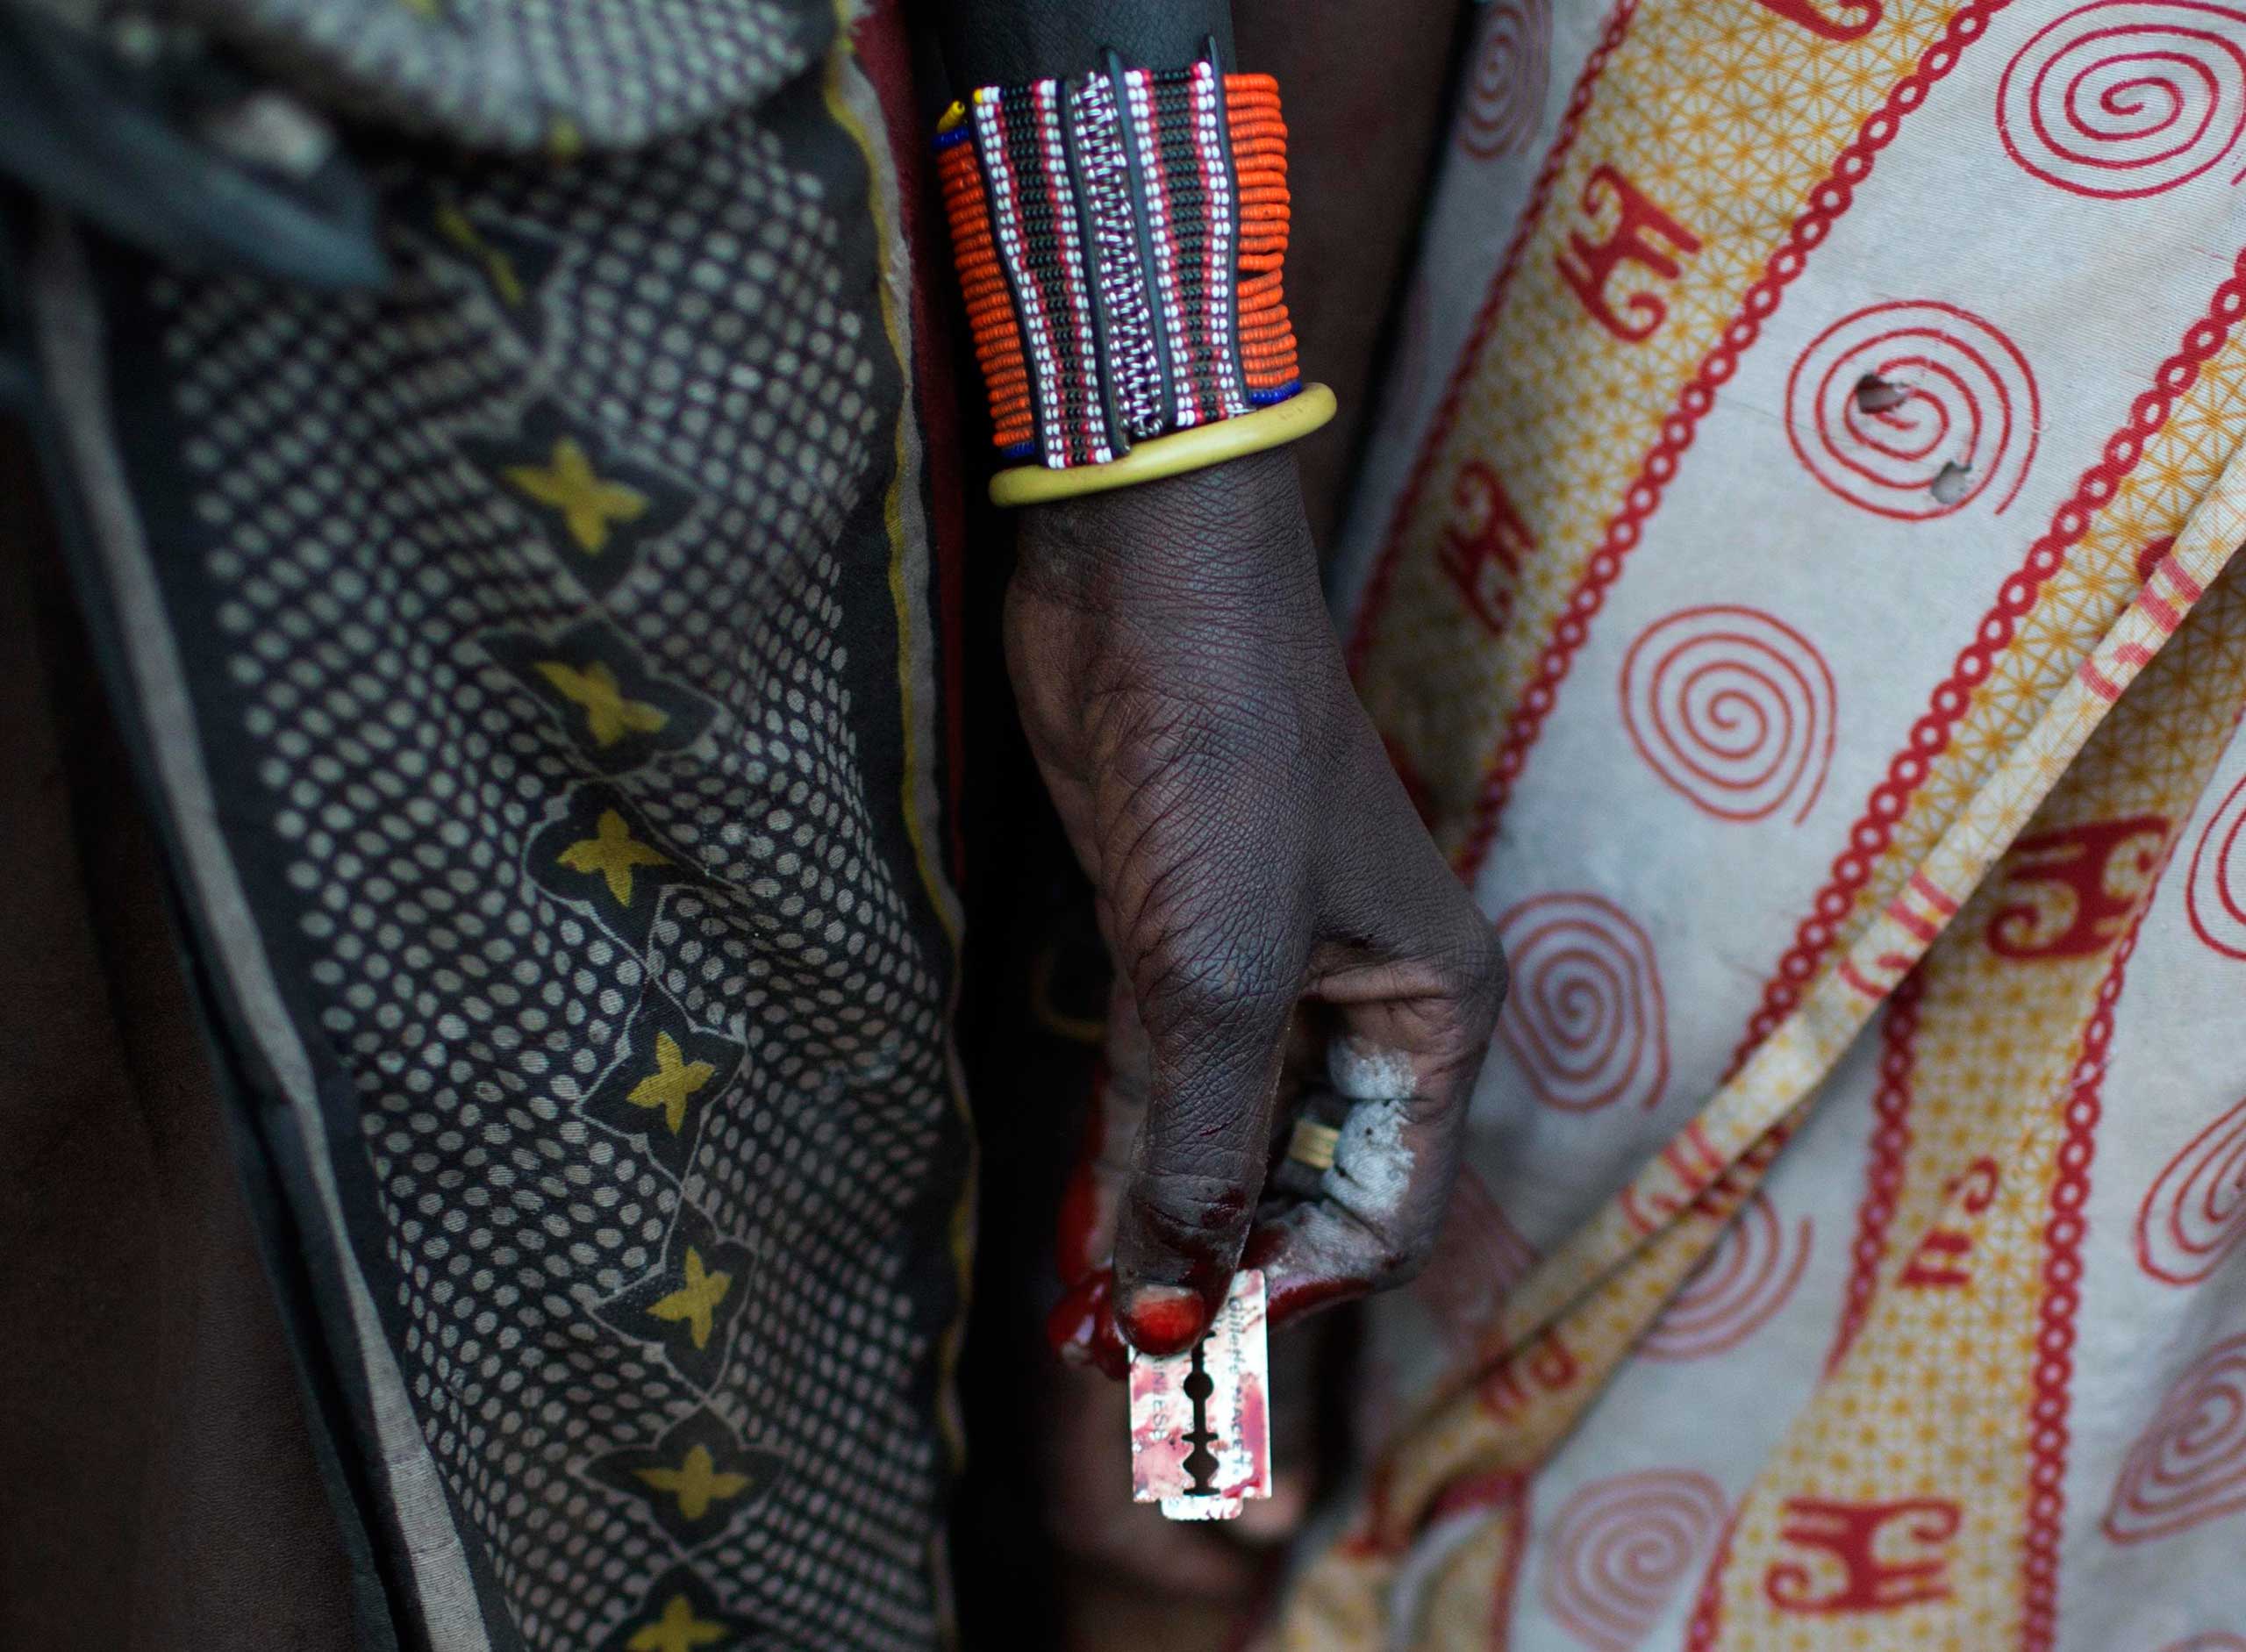 A Pokot woman holds a razor blade after performing a circumcision on four girls in a village about 80 kilometres from the town of Marigat in Baringo County